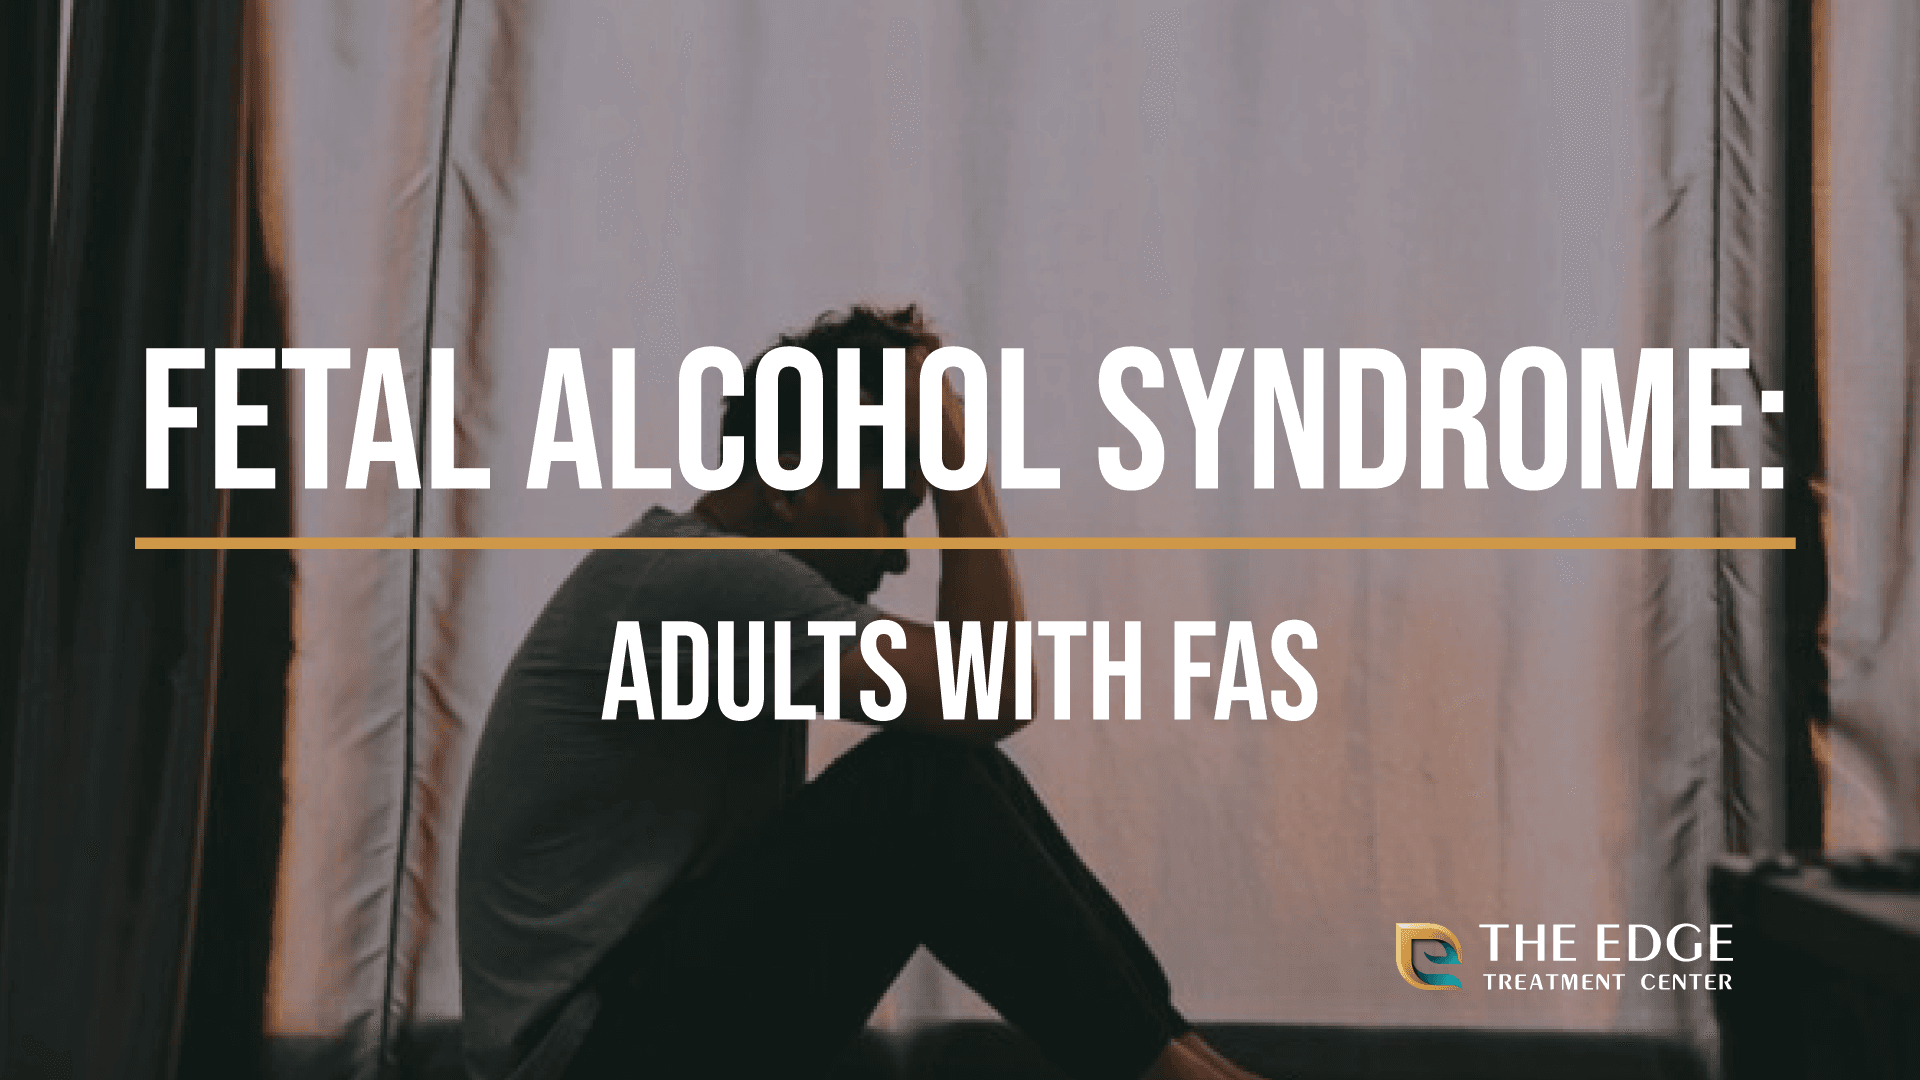 Fetal Alcohol Syndrome: Adults With FAS